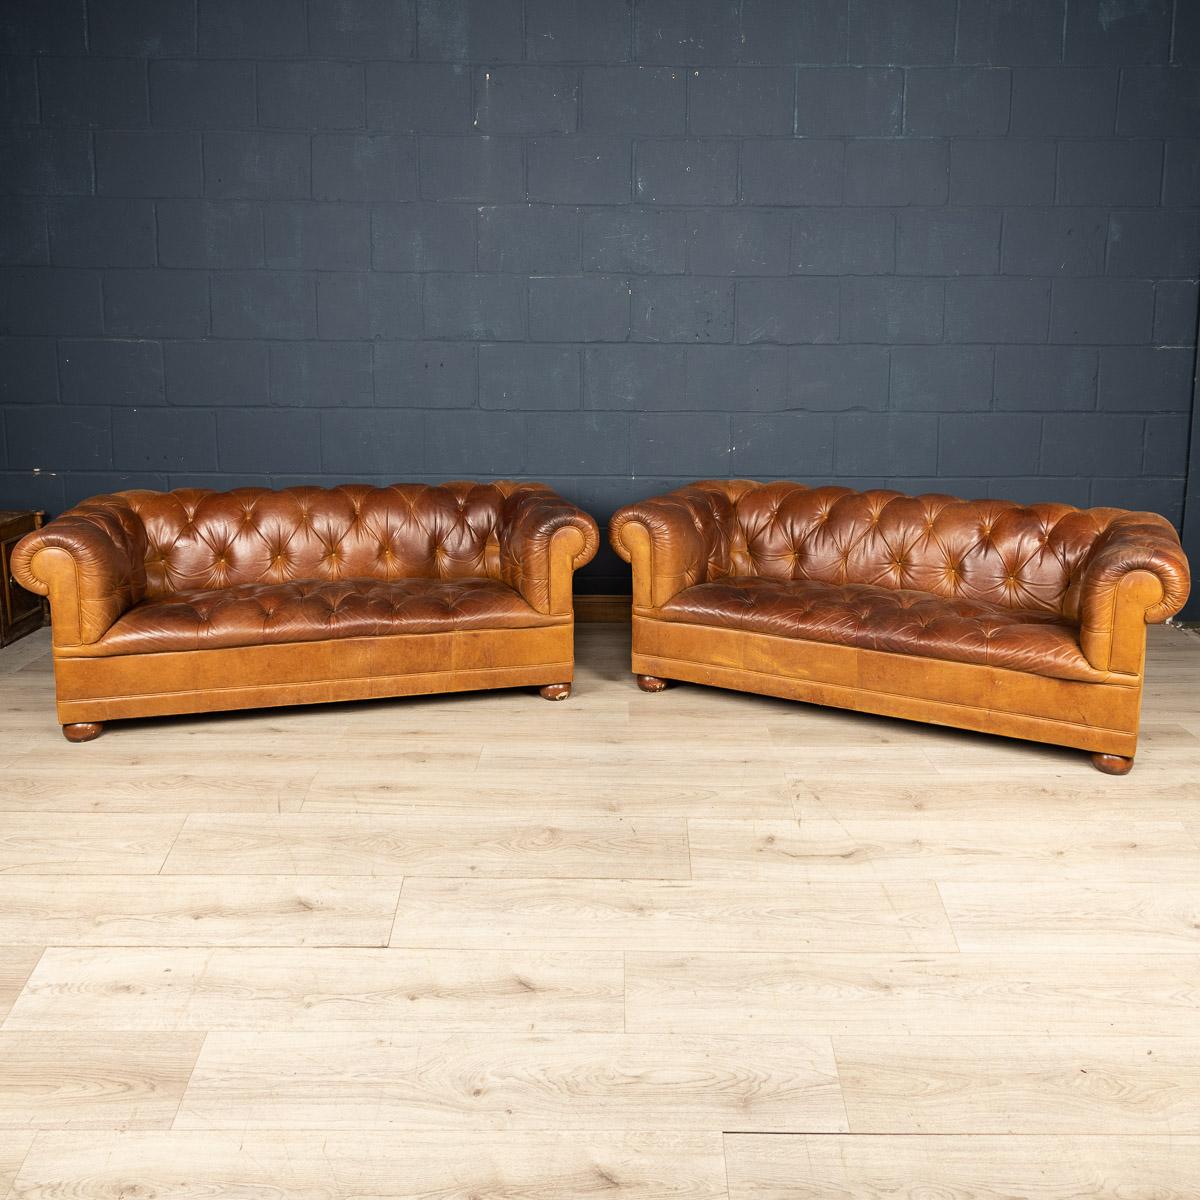 A superb pair of leather Chesterfield sofas retailed by Laura Ashley around the latter part of the 20th century. One of the most elegant models with button down seating, this is a fashionable item of furniture capable of uplifting the interior space